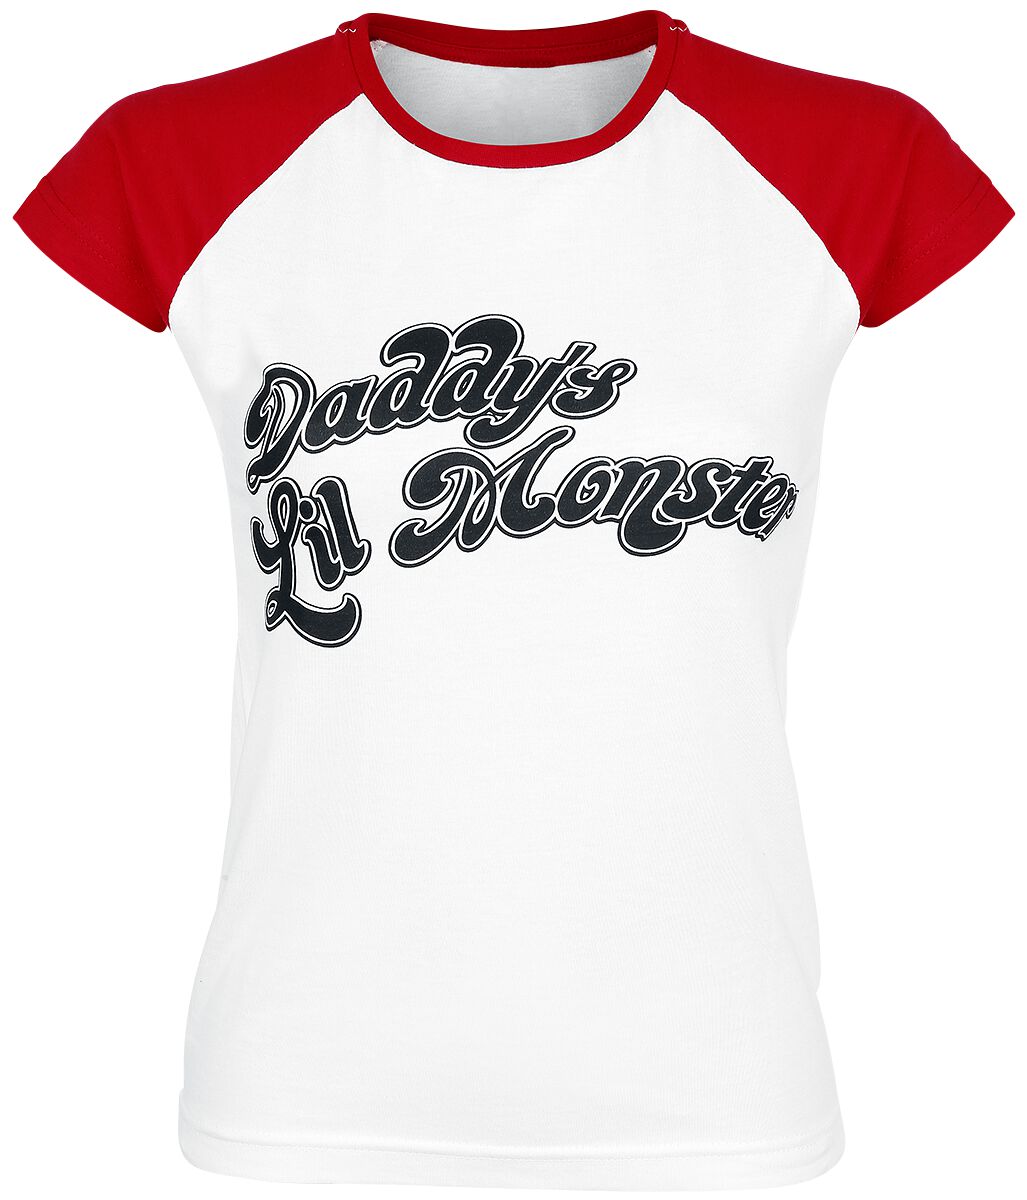 Suicide Squad Daddy's Lil' Monster T-Shirt weiß rot in L von Suicide Squad